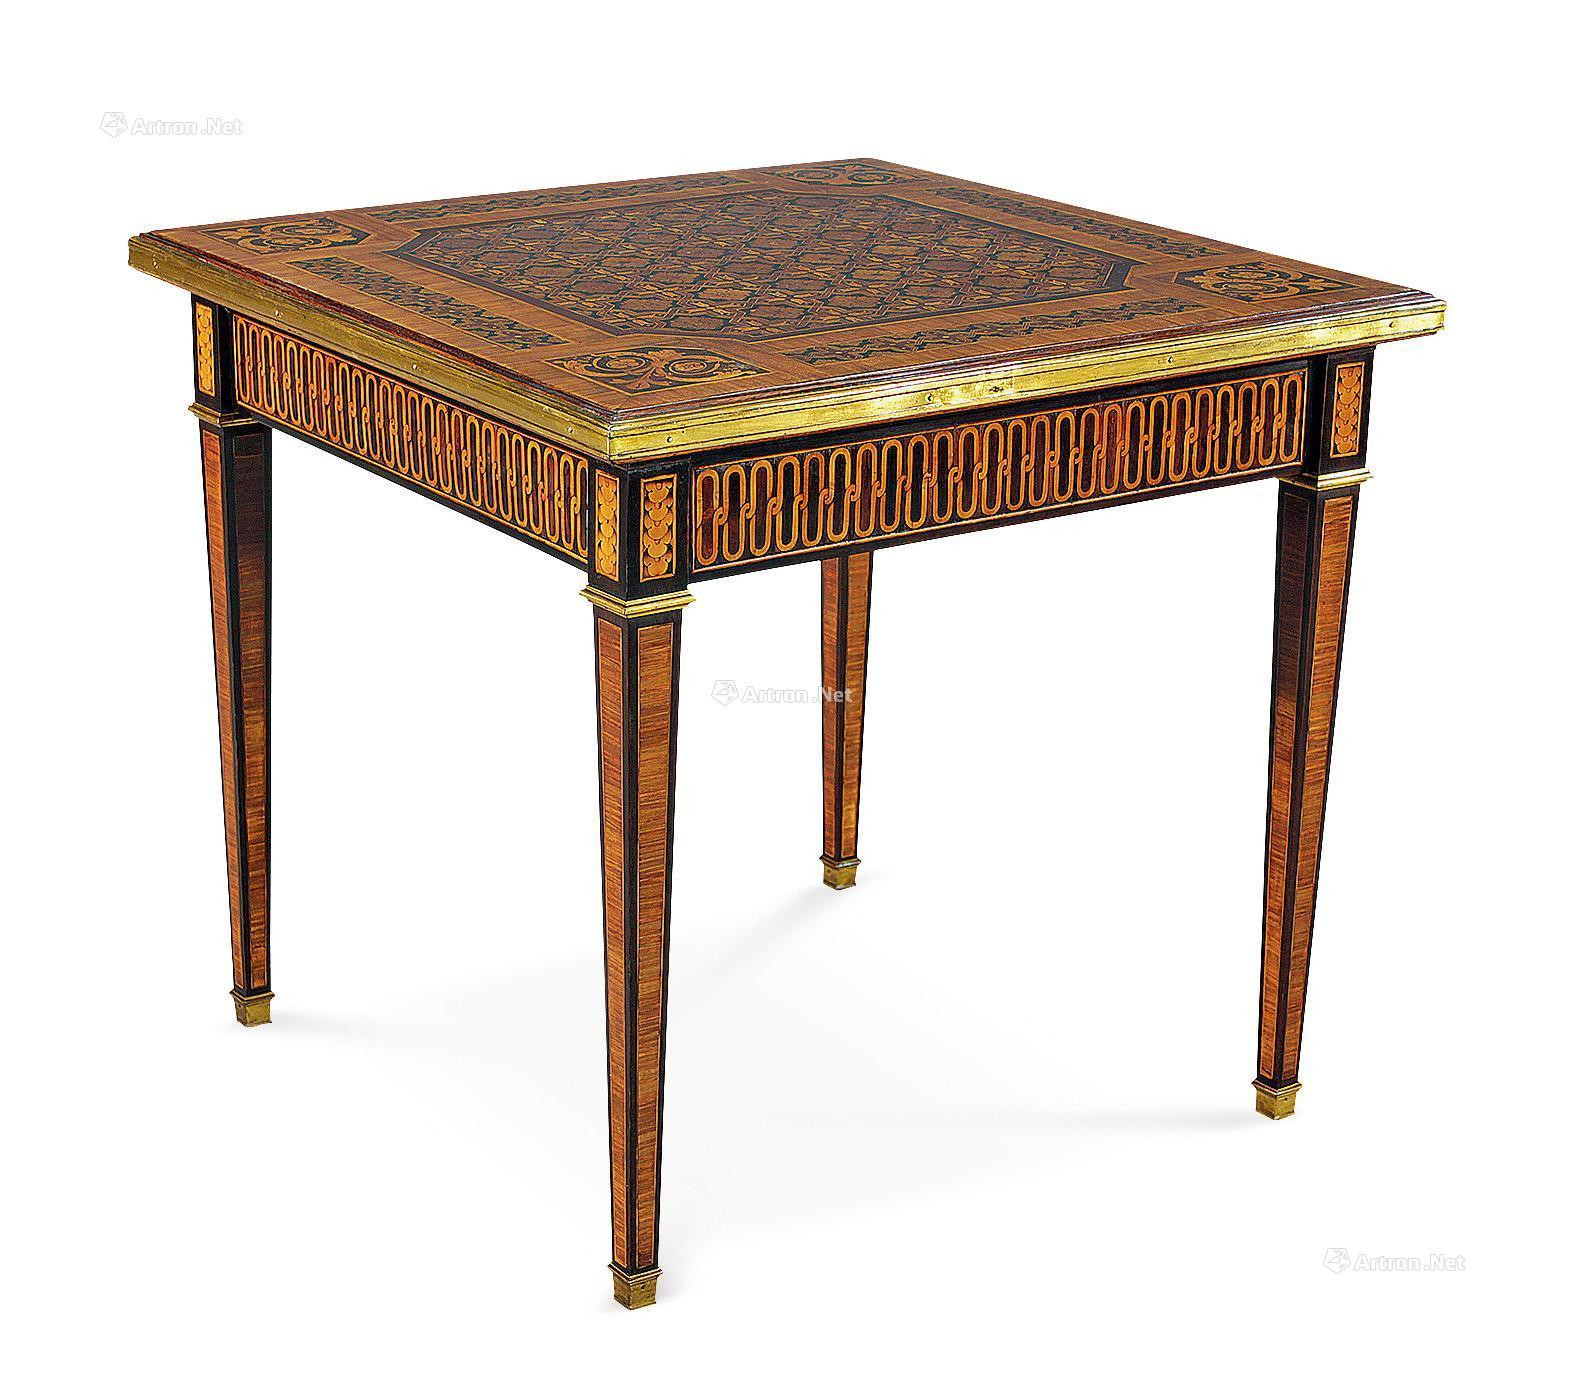 A FRENCH LOUIS XIV STYLE MARQUETRY GAME TABLE